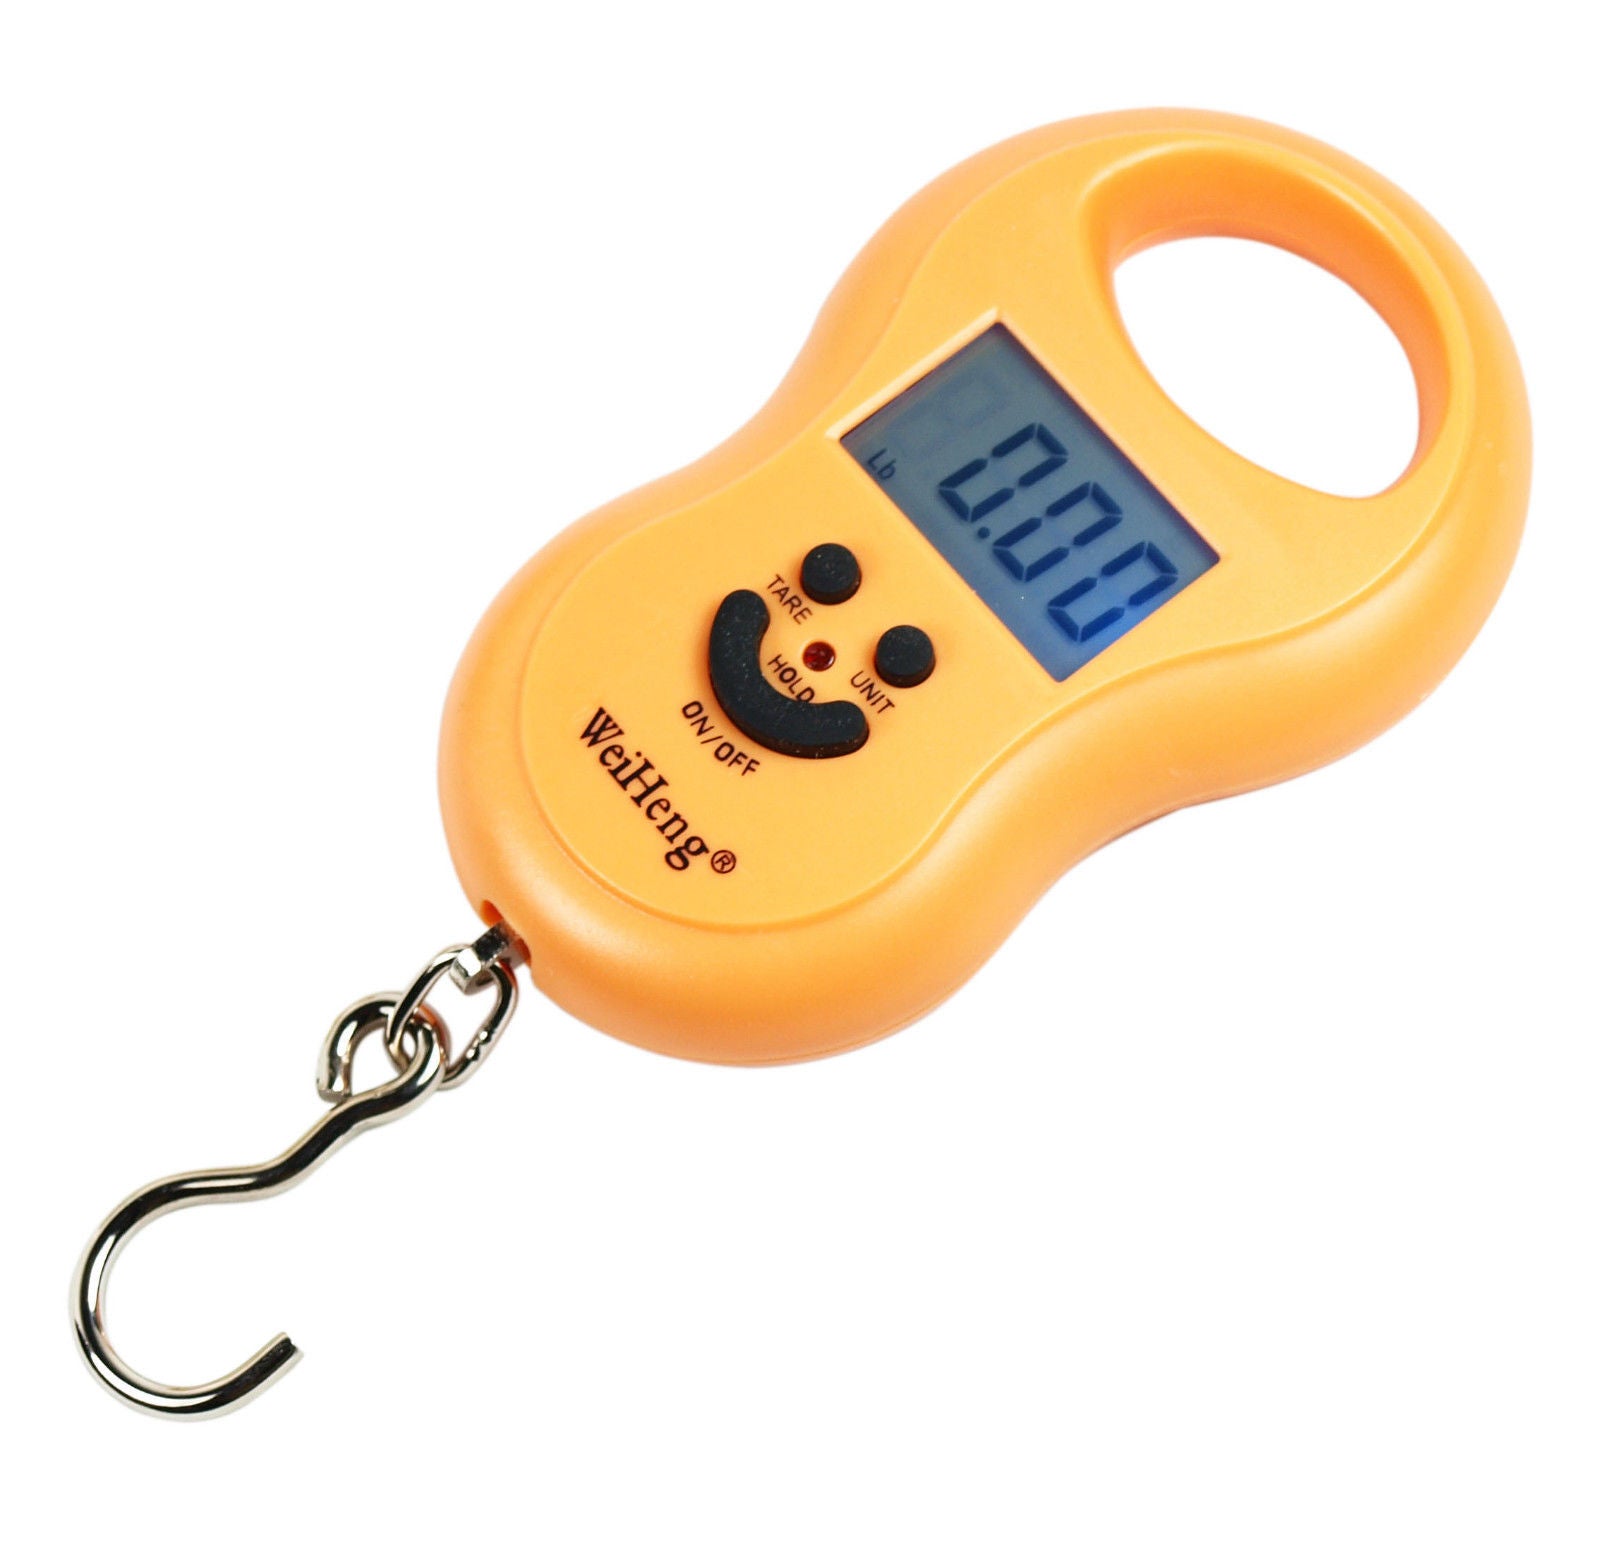 50Kg / 5g-10g Portable Digital Hanging / Fishing Scale with